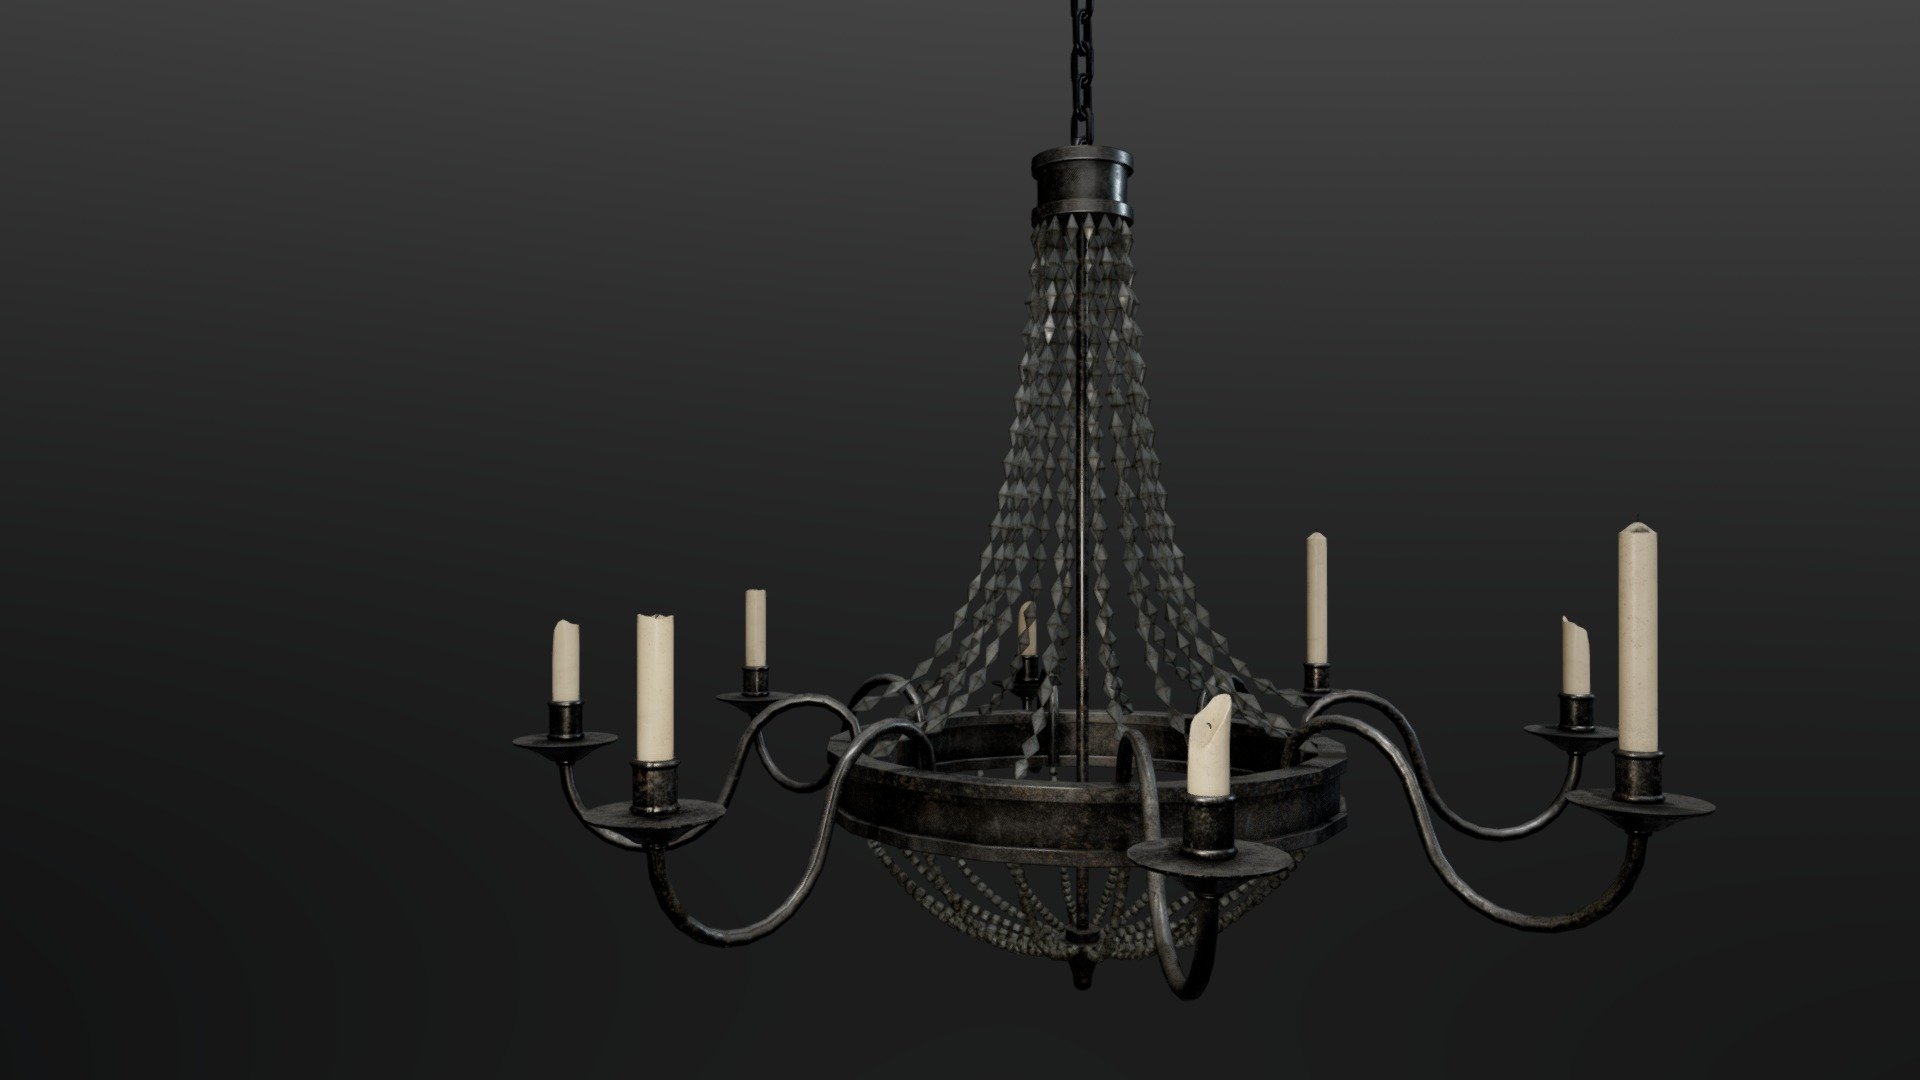 This chandelier, which was created for a Unity Victorian bedroom scene, was modelled in Maya and textured in Substance Painter 3d model